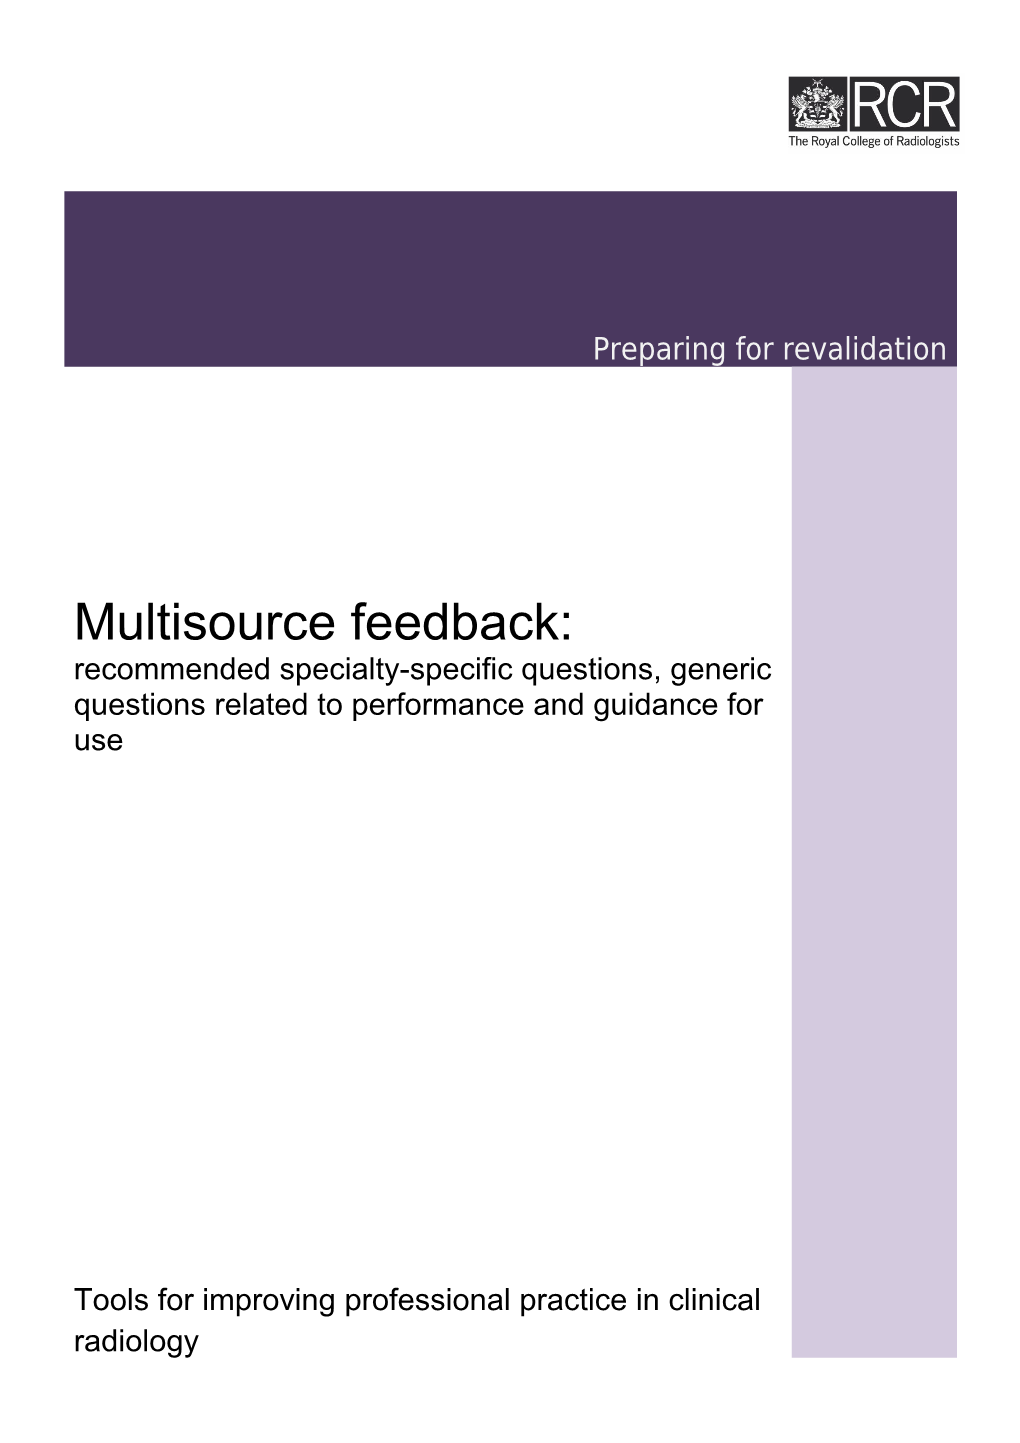 Multisource Feedback: Recommended Specialty-Specific Questions, Generic Questions Related